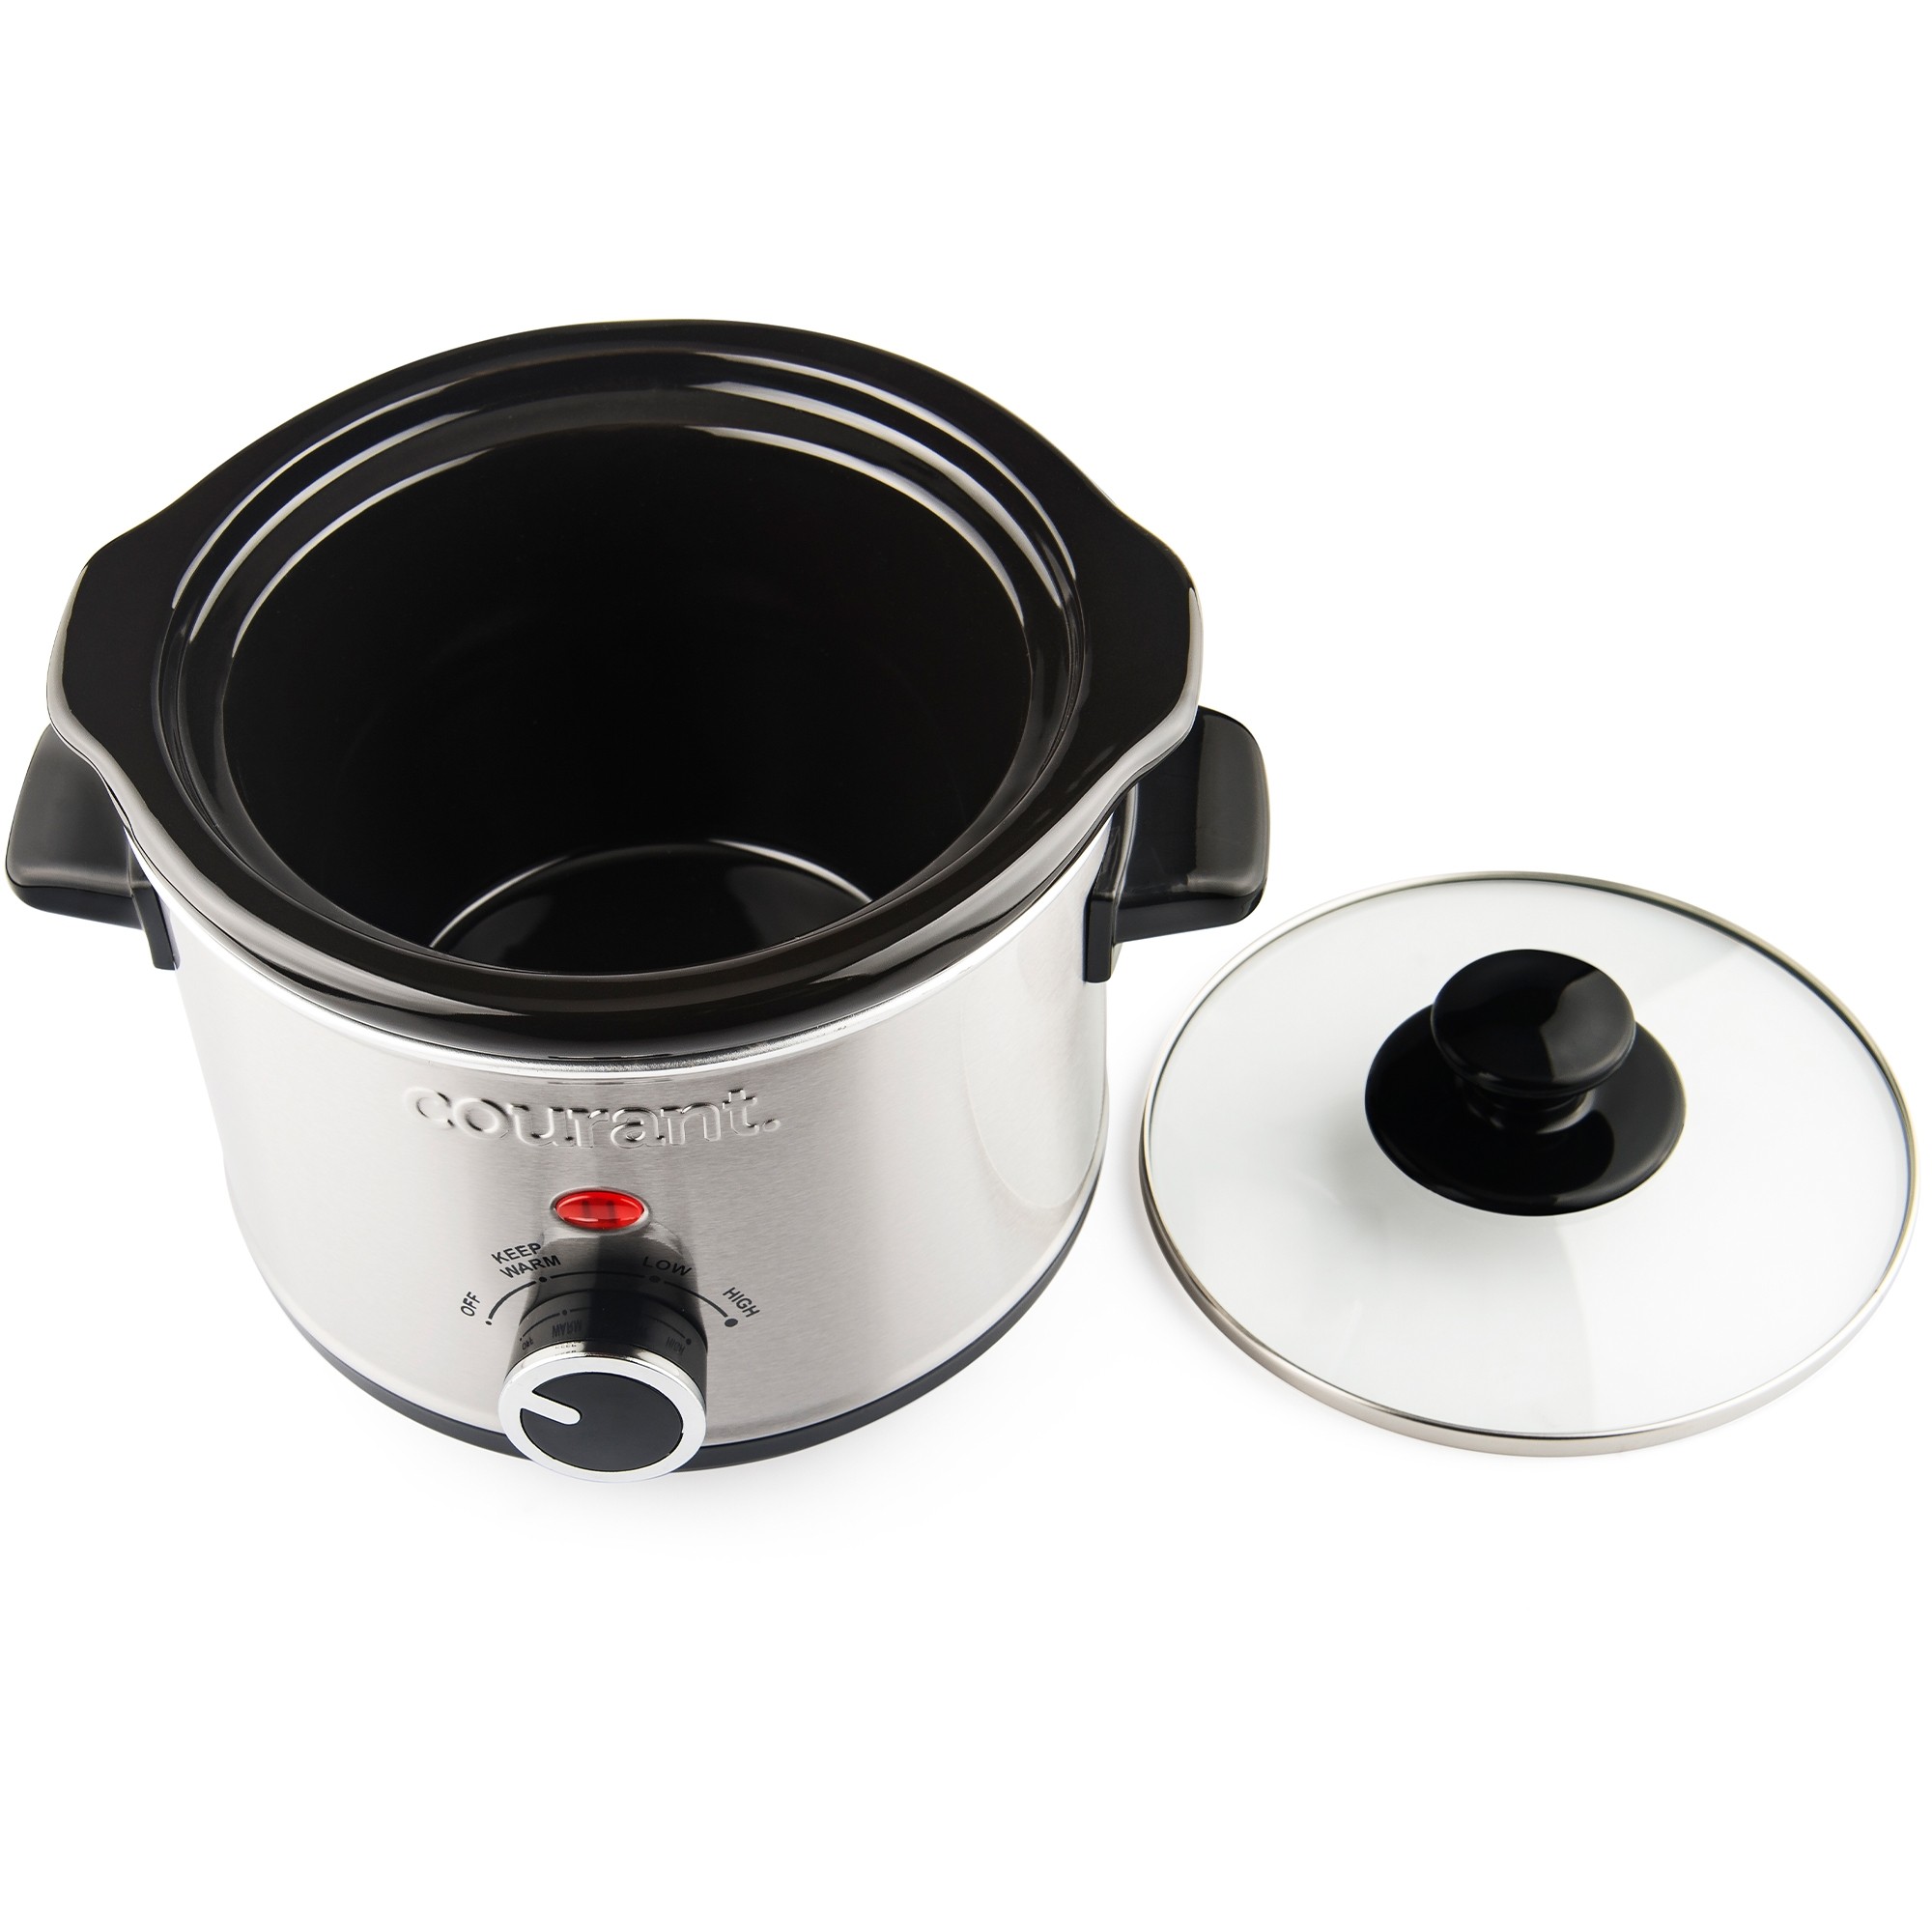 Courant RNAB0BQ4LWR6V courant mini slow cooker crock, with easy